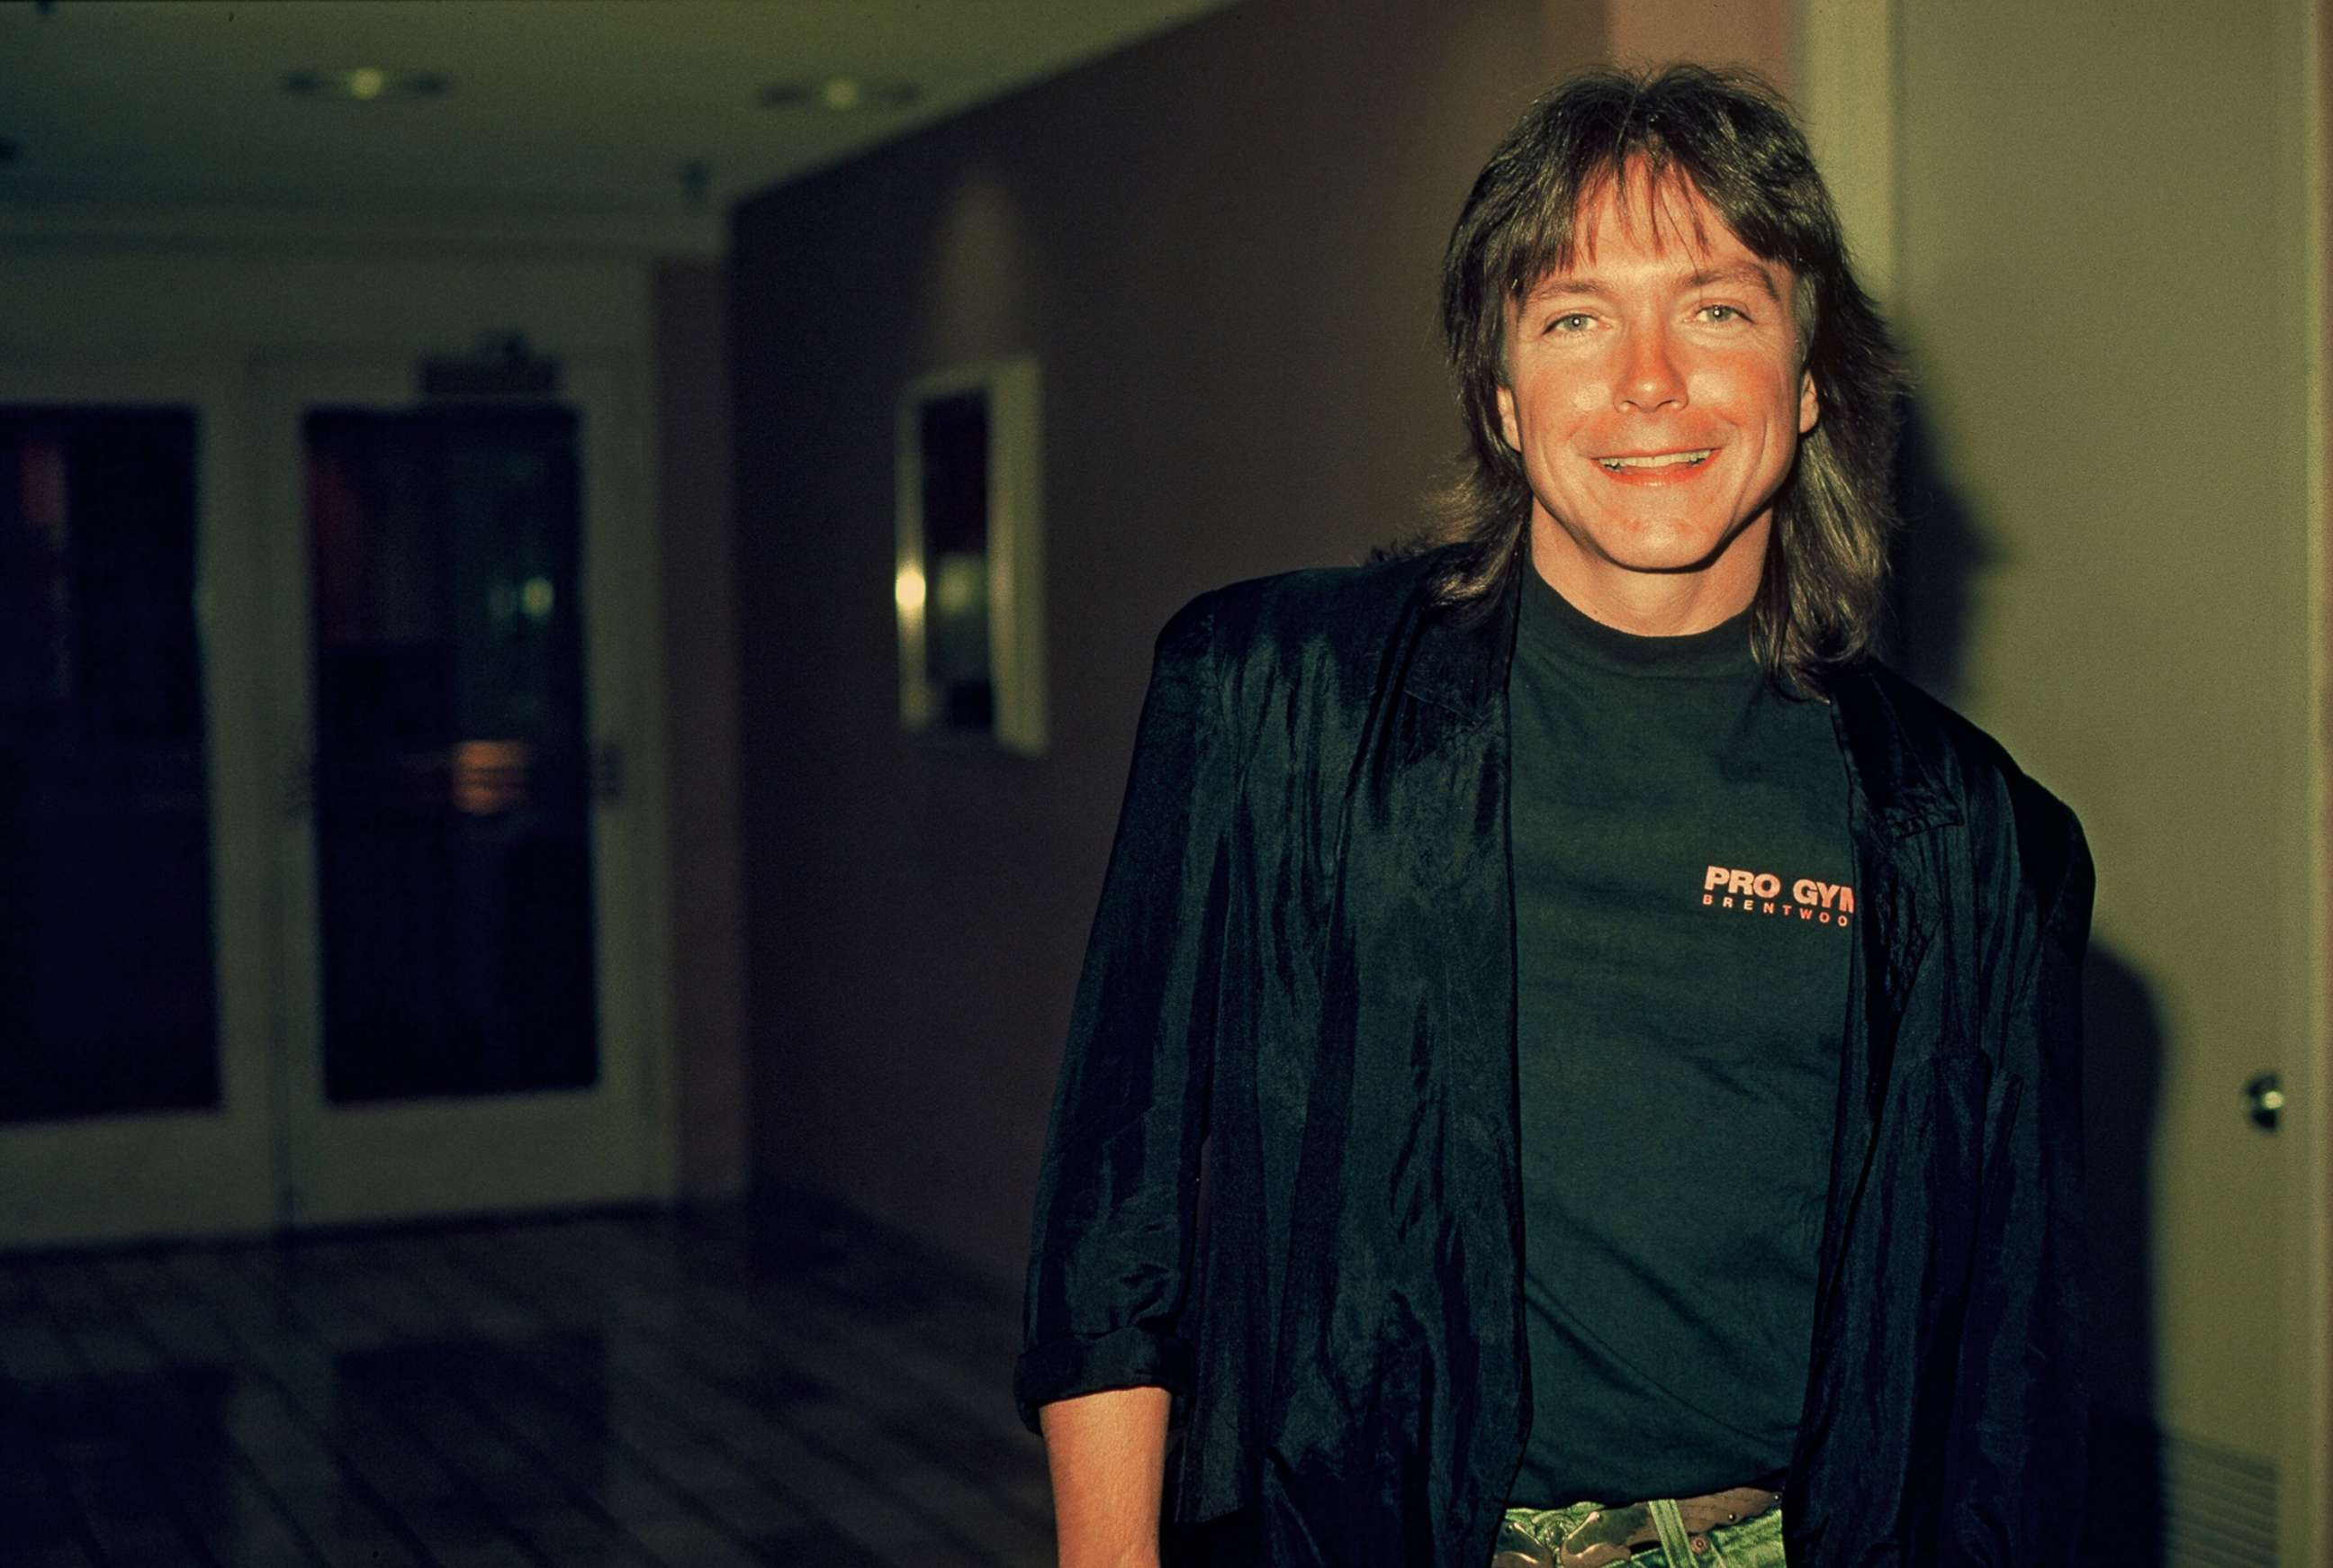 PHOTO: Singer, actor David Cassidy poses for a portrait in Minneapolis, Minn. on July 1, 1990.